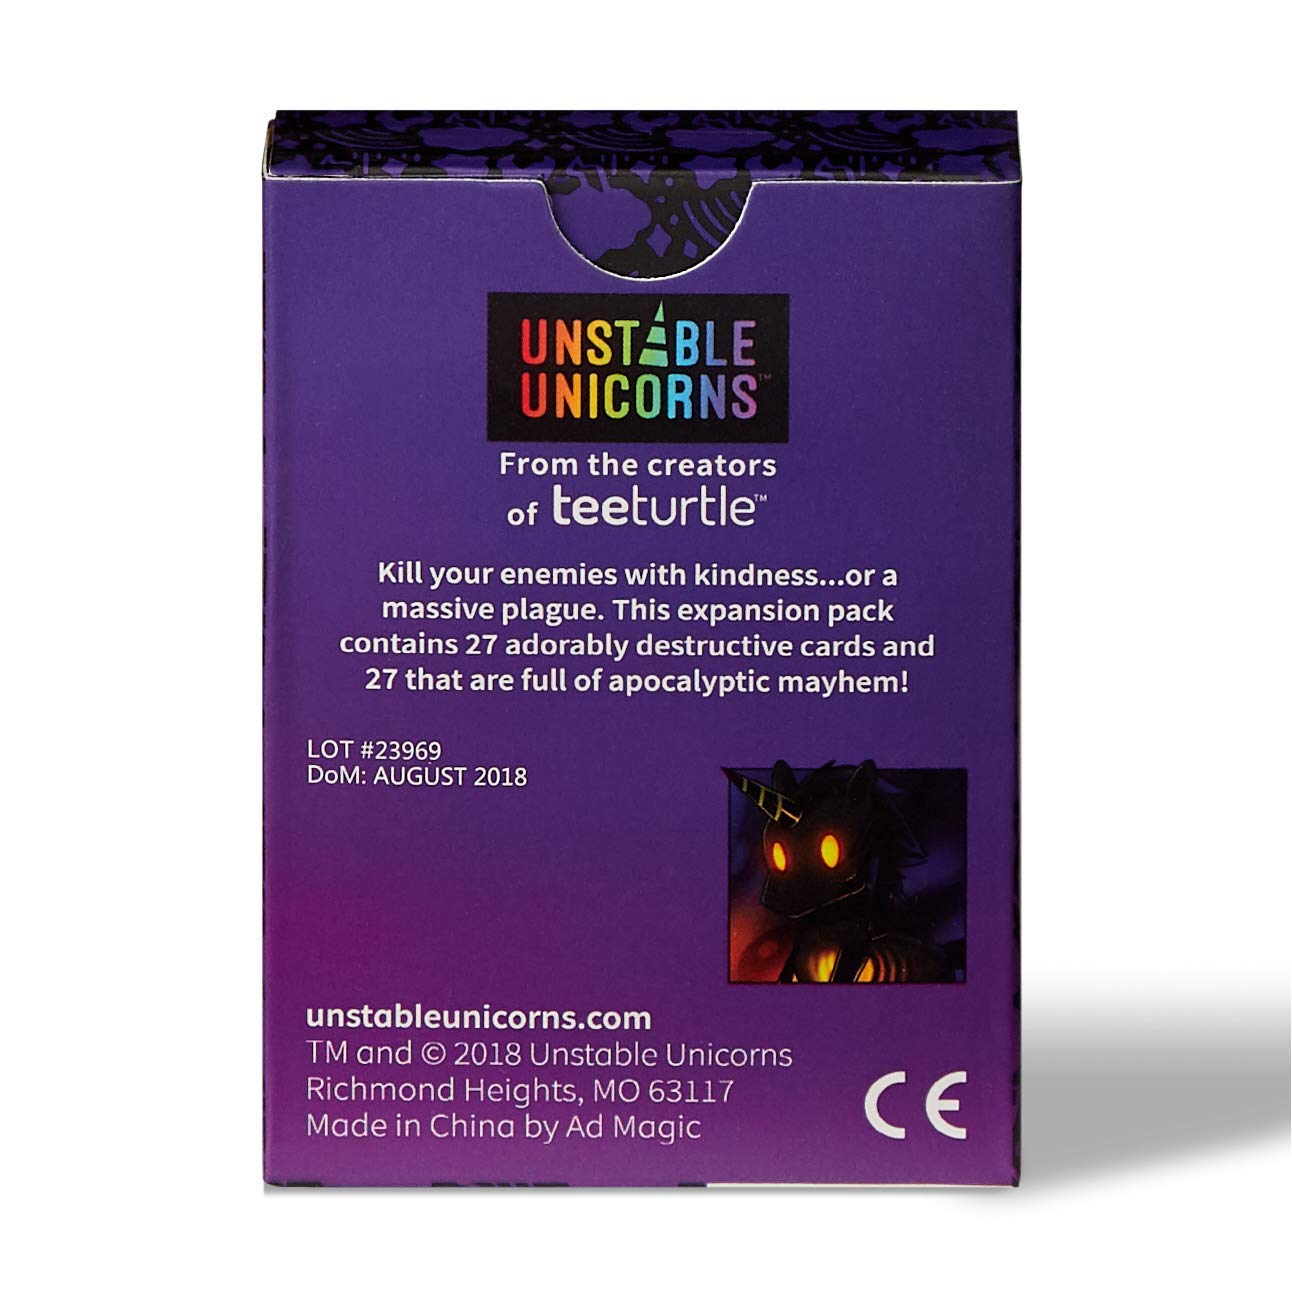 Unstable Unicorns Unicorns of Legend Expansion Pack - Designed to be Added to Your Card Game